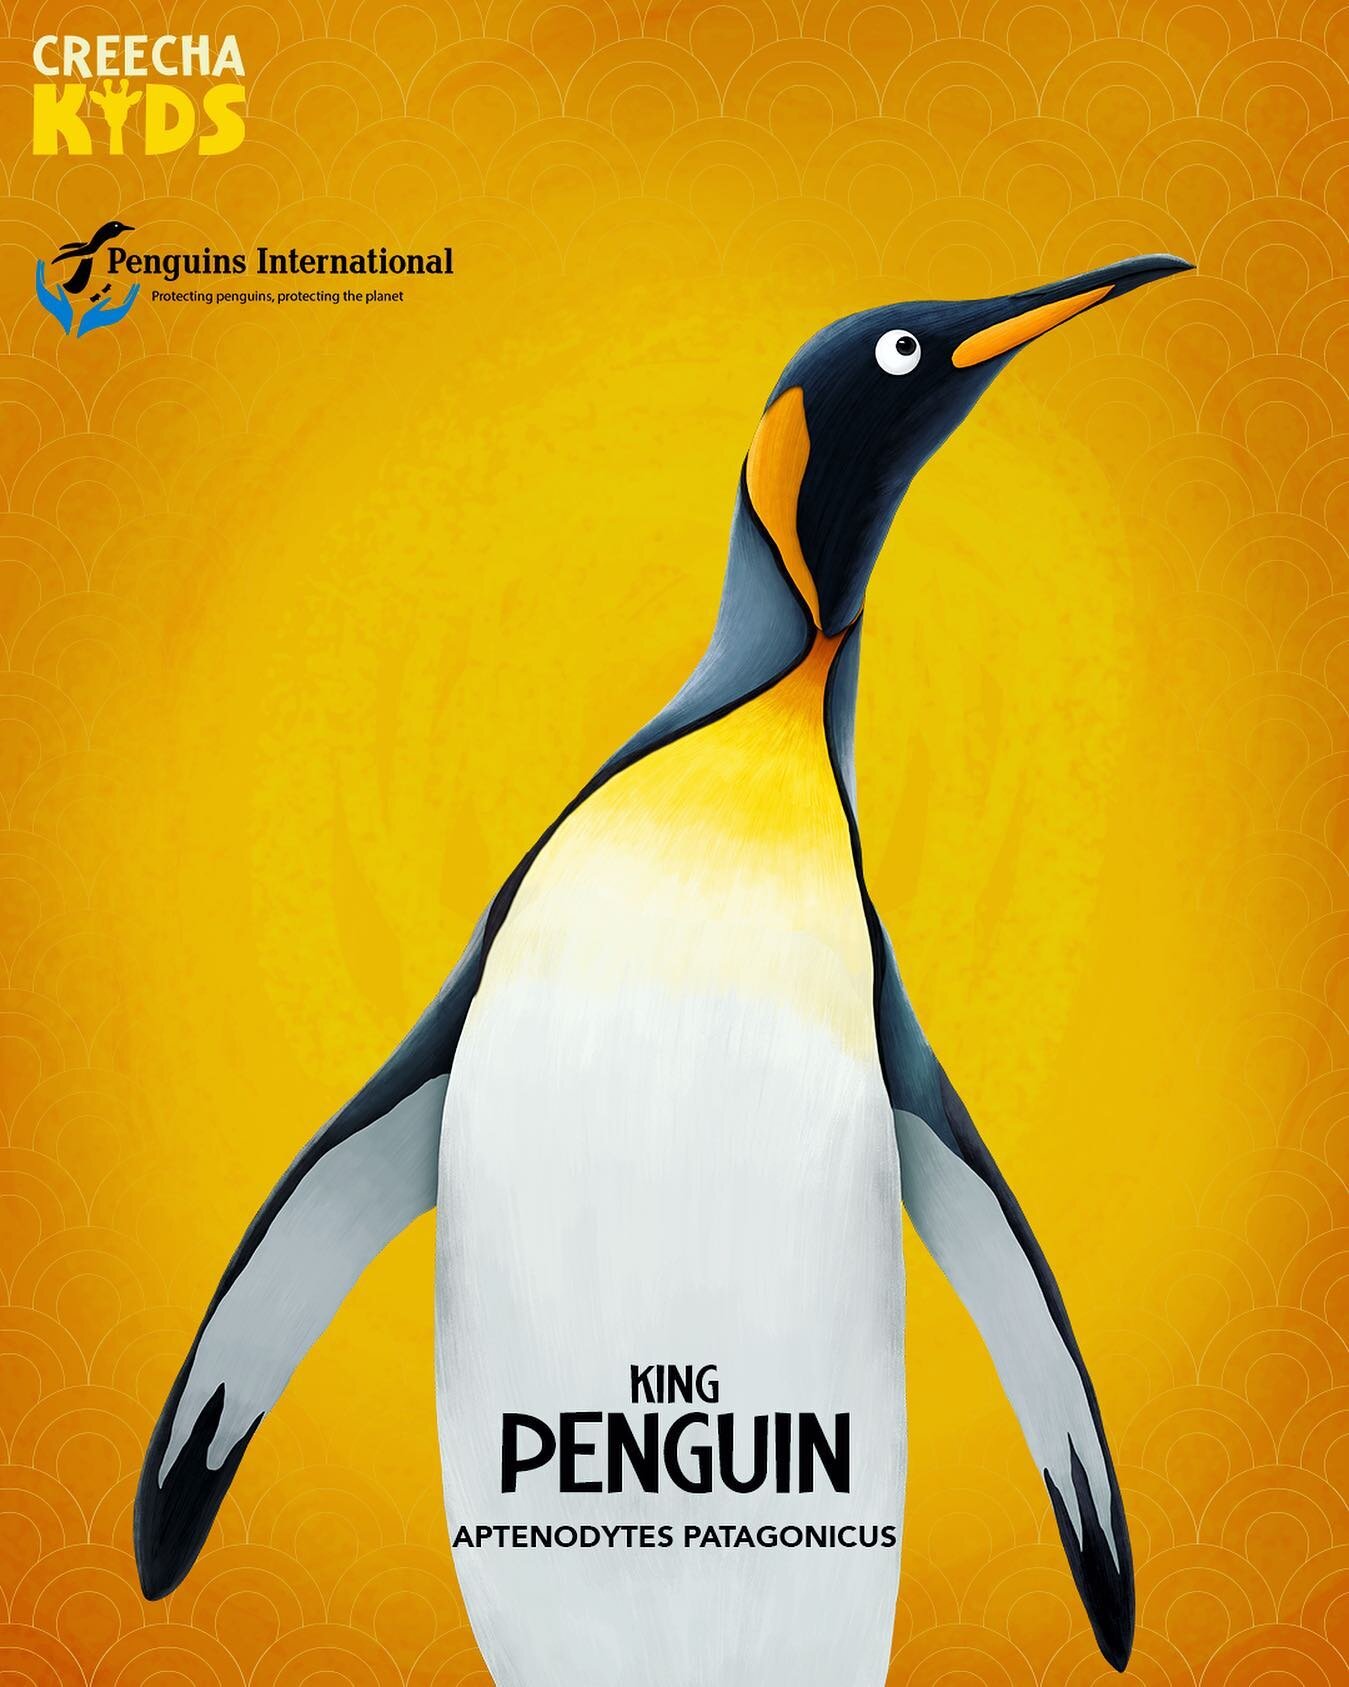 In honor of world penguin day coming up on Sunday April 25th, we are taking a look at King Penguins!
Our facts today come from Katie Propp ( @wildlifekatie ) Conservation Education Manager at @penguins_international

The King Penguin is the second la